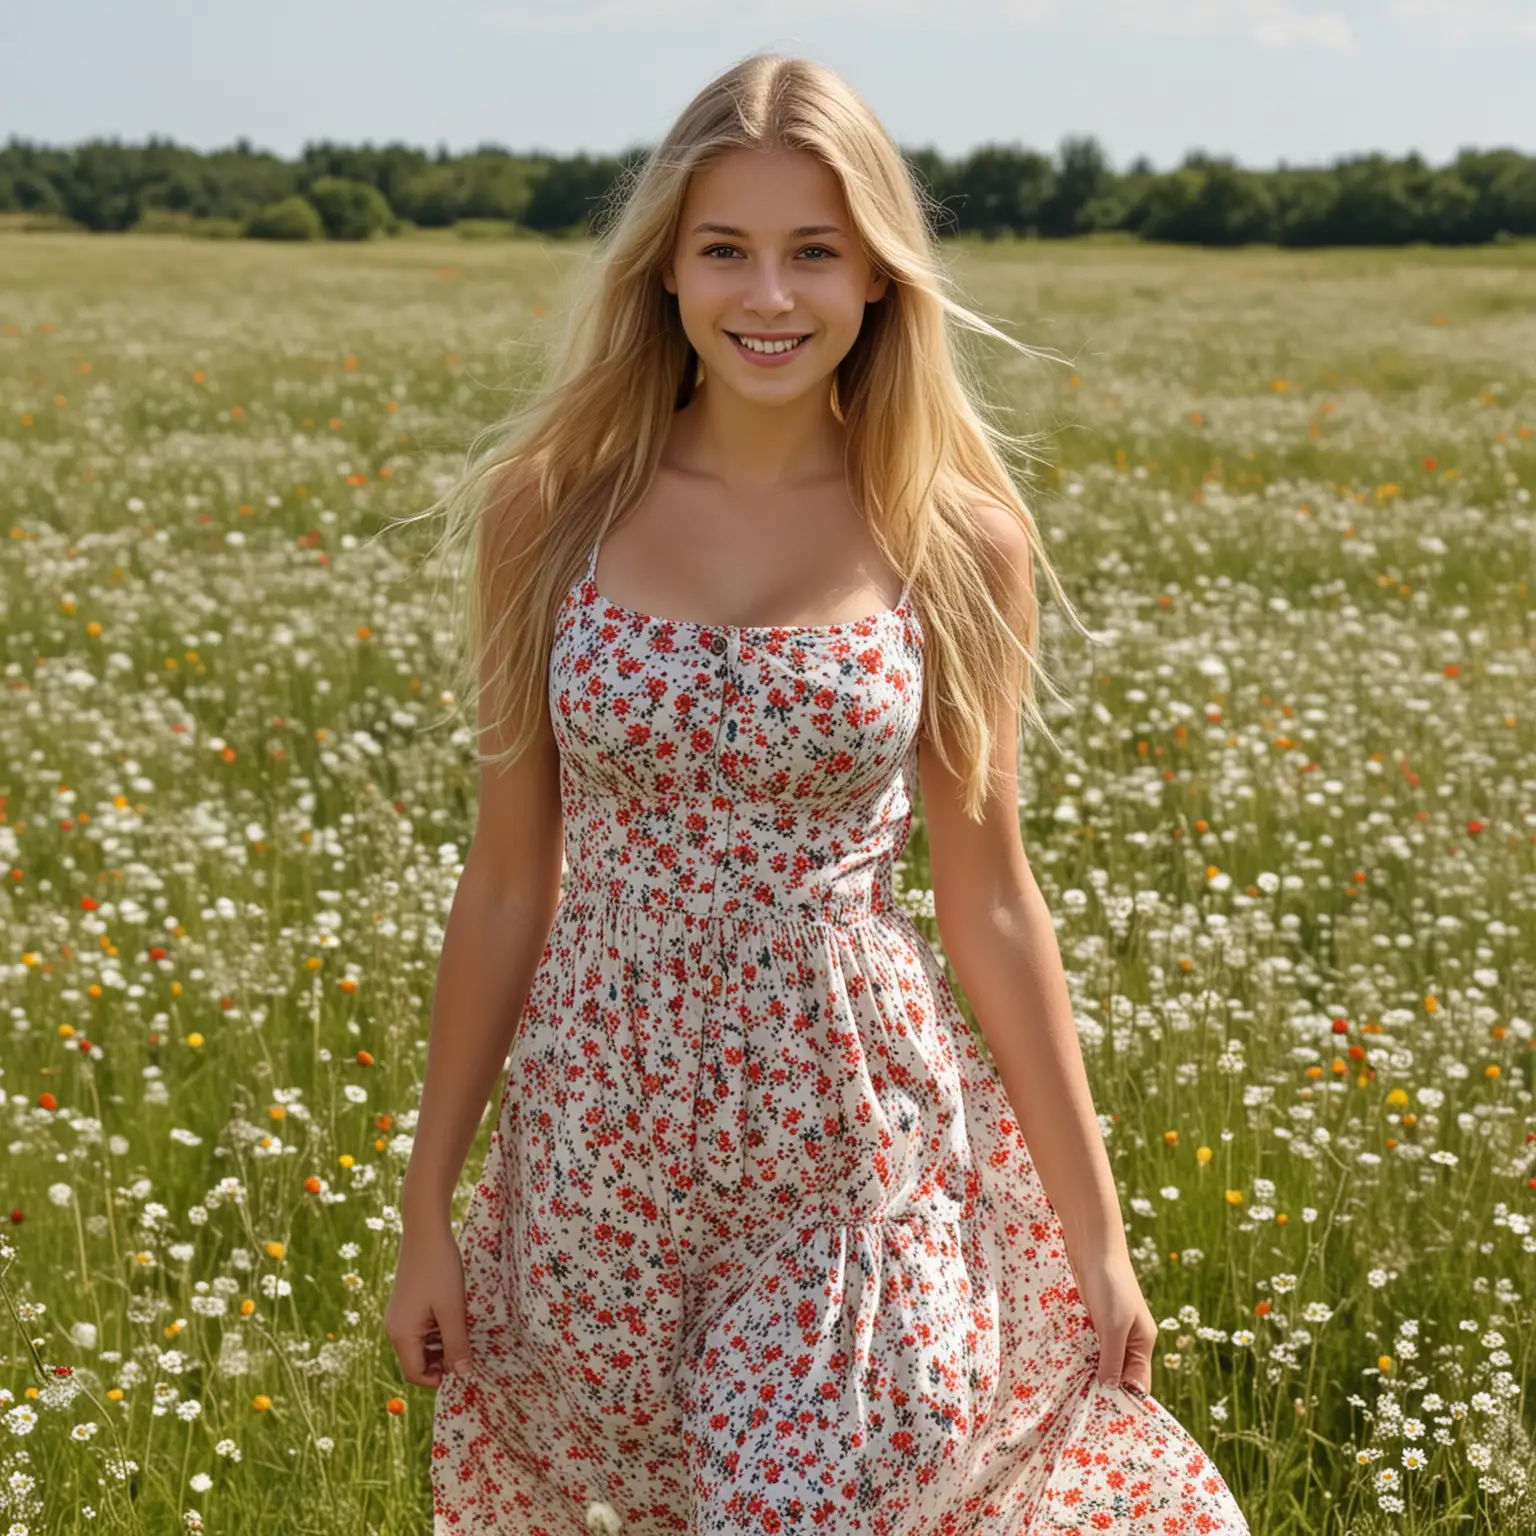 Young Blonde Woman Walking Happily in Floral Meadow